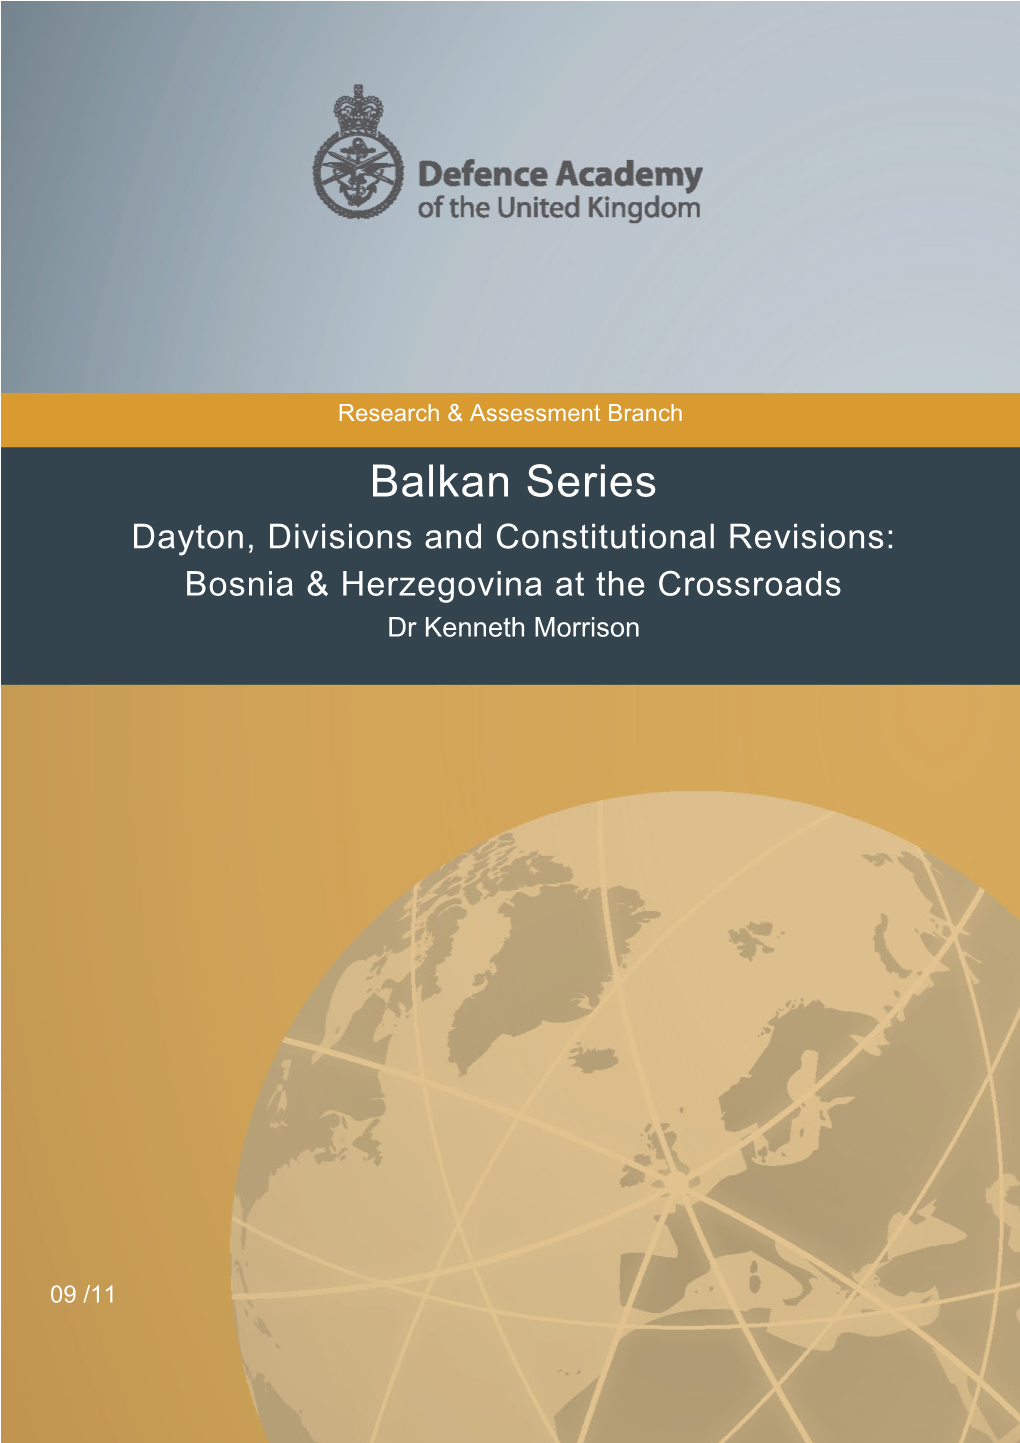 Dayton, Divisions and Constitutional Revisions